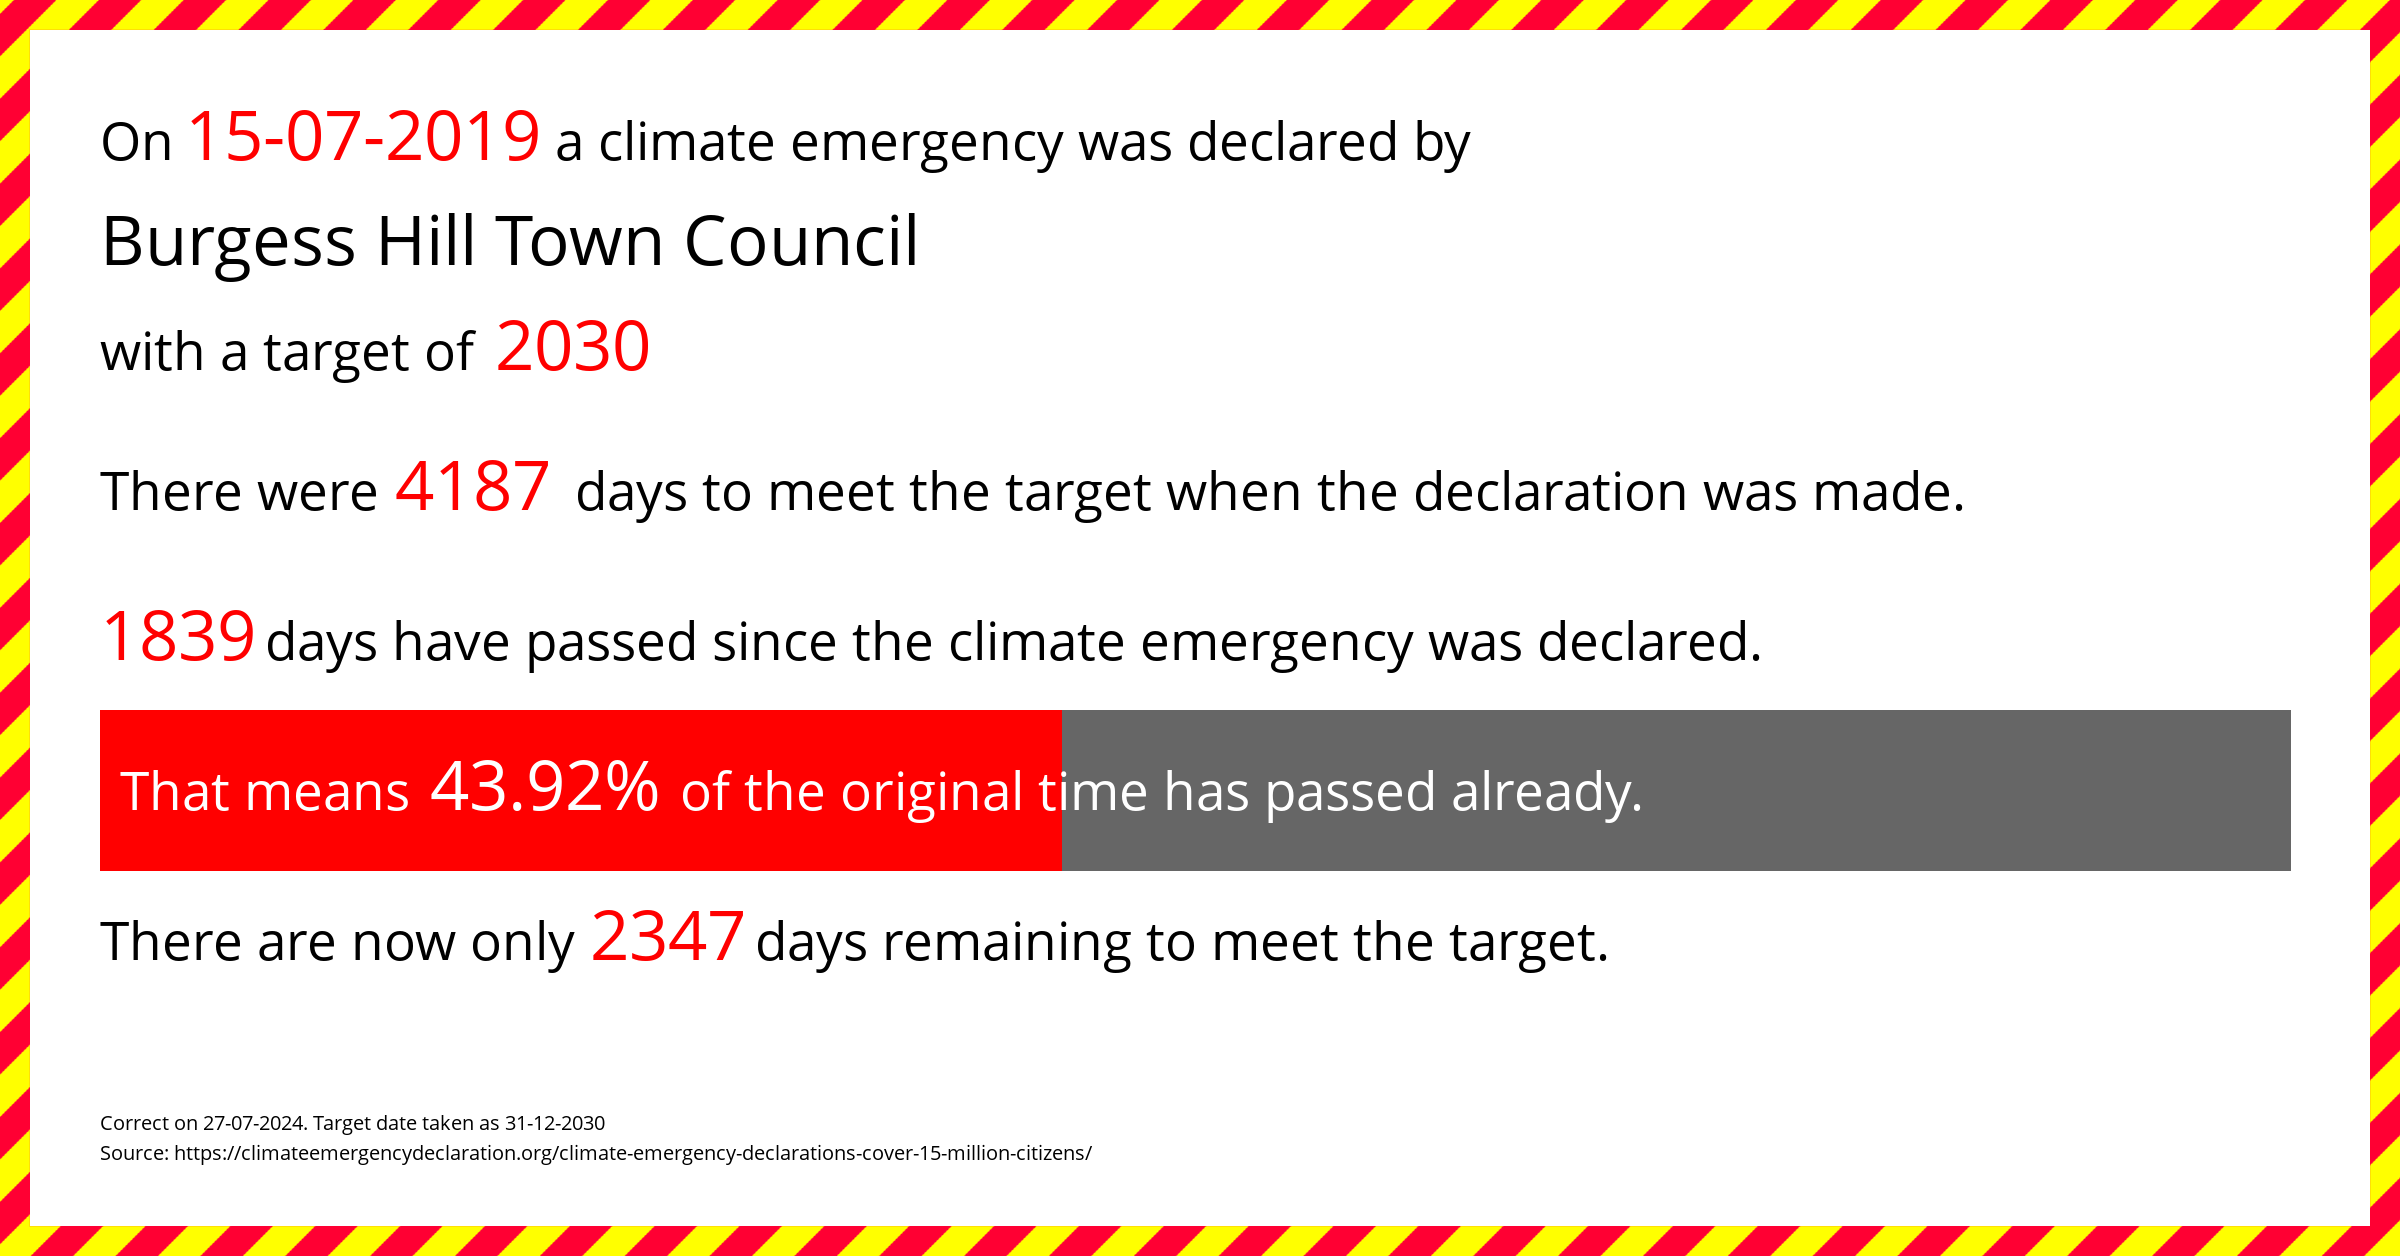 Burgess Hill Town Council declared a Climate emergency on Monday 15th July 2019, with a target of 2030.